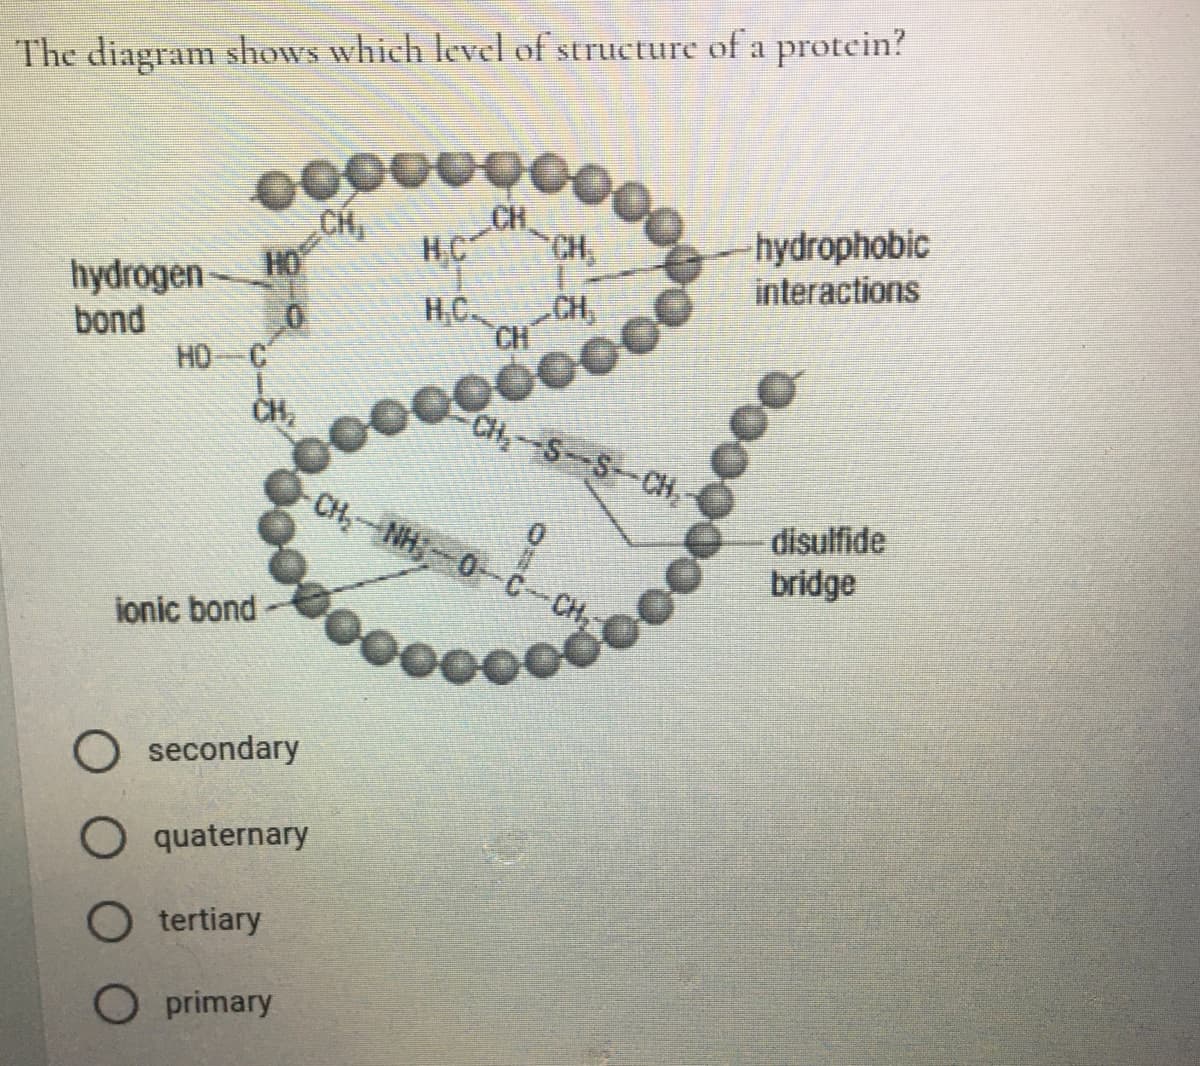 The diagram shows which level of structure of a protein?
CH,
CH,
-hydrophobic
interactions
H.C
CH,
hydrogen– HO
bond
HC
CH,
CH
НО - С
CH,
CH,--S-S-CH,
CH,-NH-0-C-CH,
disulfide
bridge
ionic bond
O secondary
O quaternary
O tertiary
O primary
00
